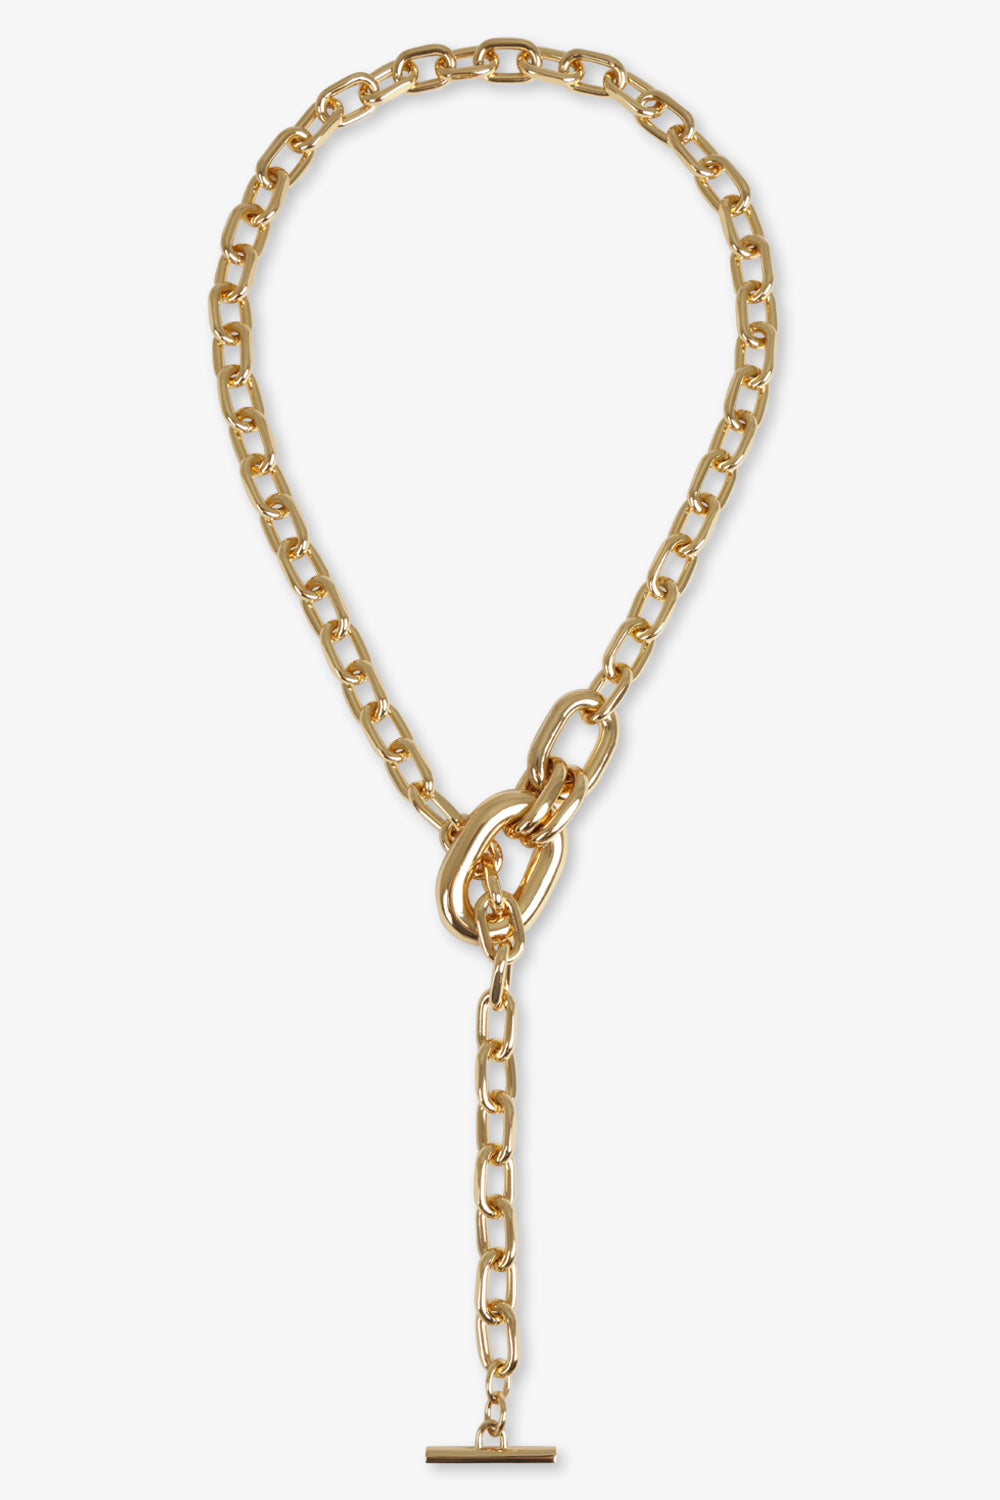 RABANNE JEWELLERY GOLD DOUBLE WRAP ADJUSTABLE CHAIN NECKLACE  | GOLD